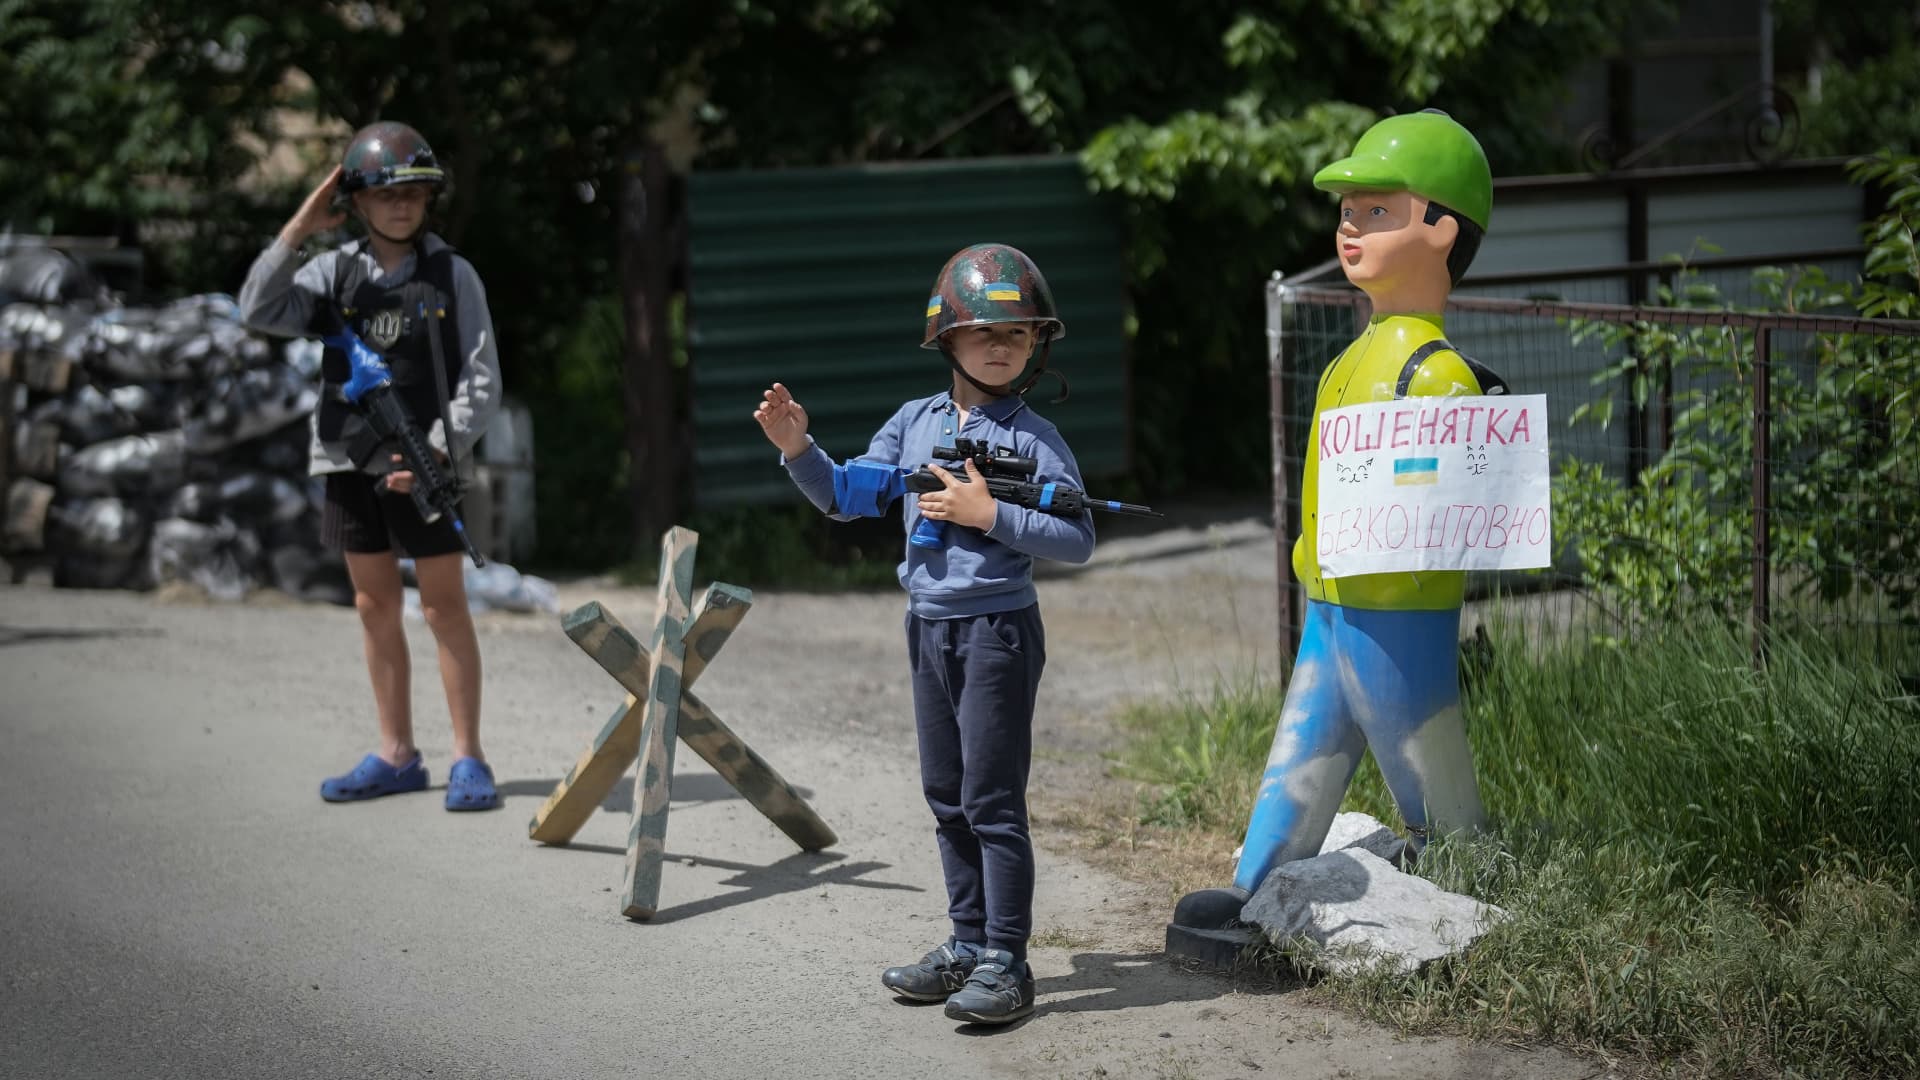 Ukrainian boys Andrii, aged 12 and his friend Valentyn 6, play at being soldiers and man their makeshift checkpoint in their village next to a school crossing. The two boys have become well known to passing motorists on May 27, 2022 in Stoyanka, Ukraine. 